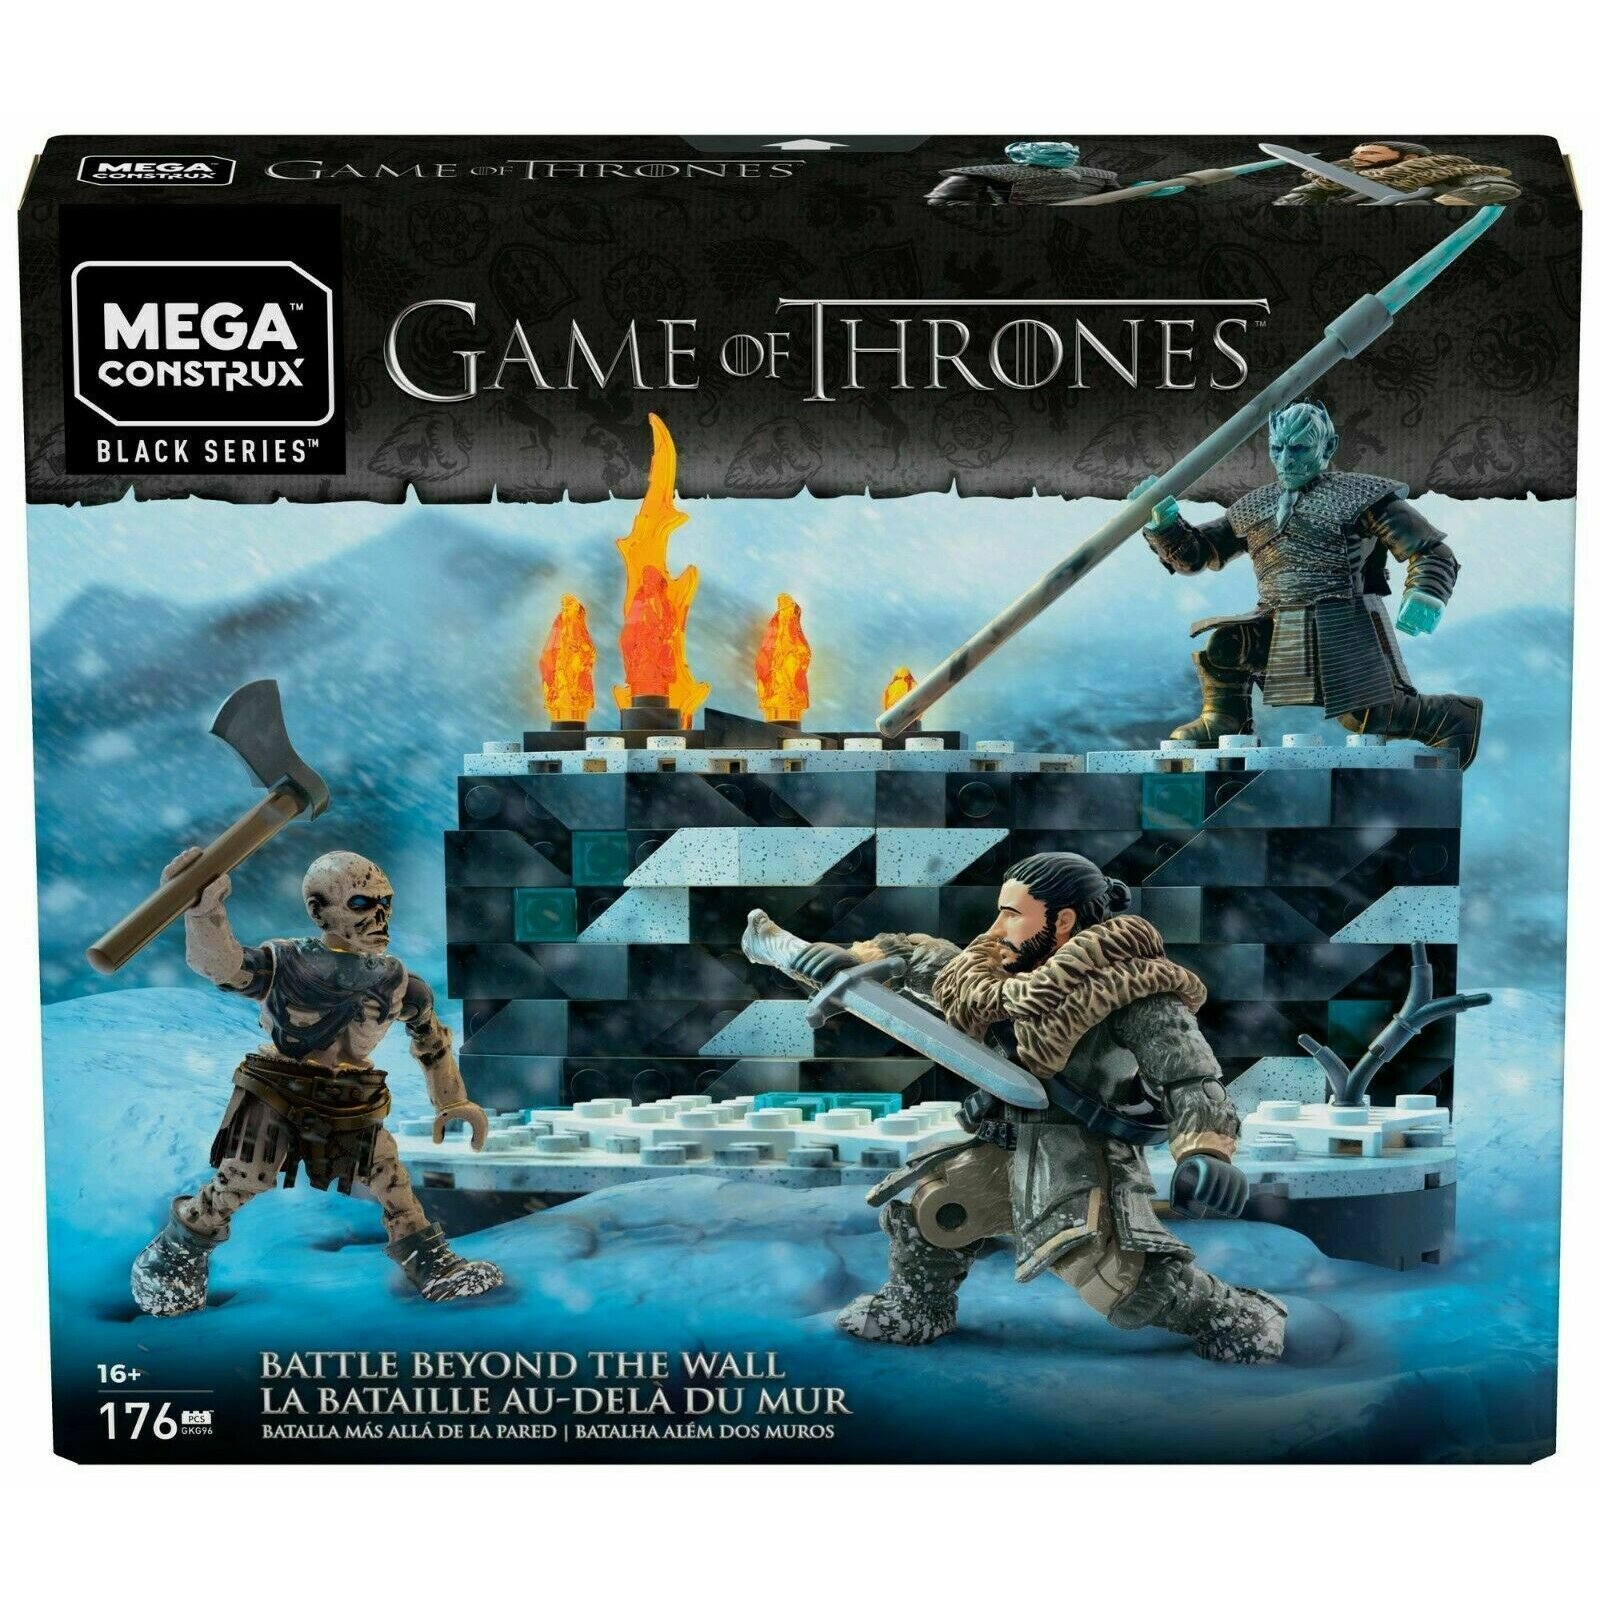 Mega Construx Black Series: Game Of Thrones - Battle Beyond the Wall - Brand New